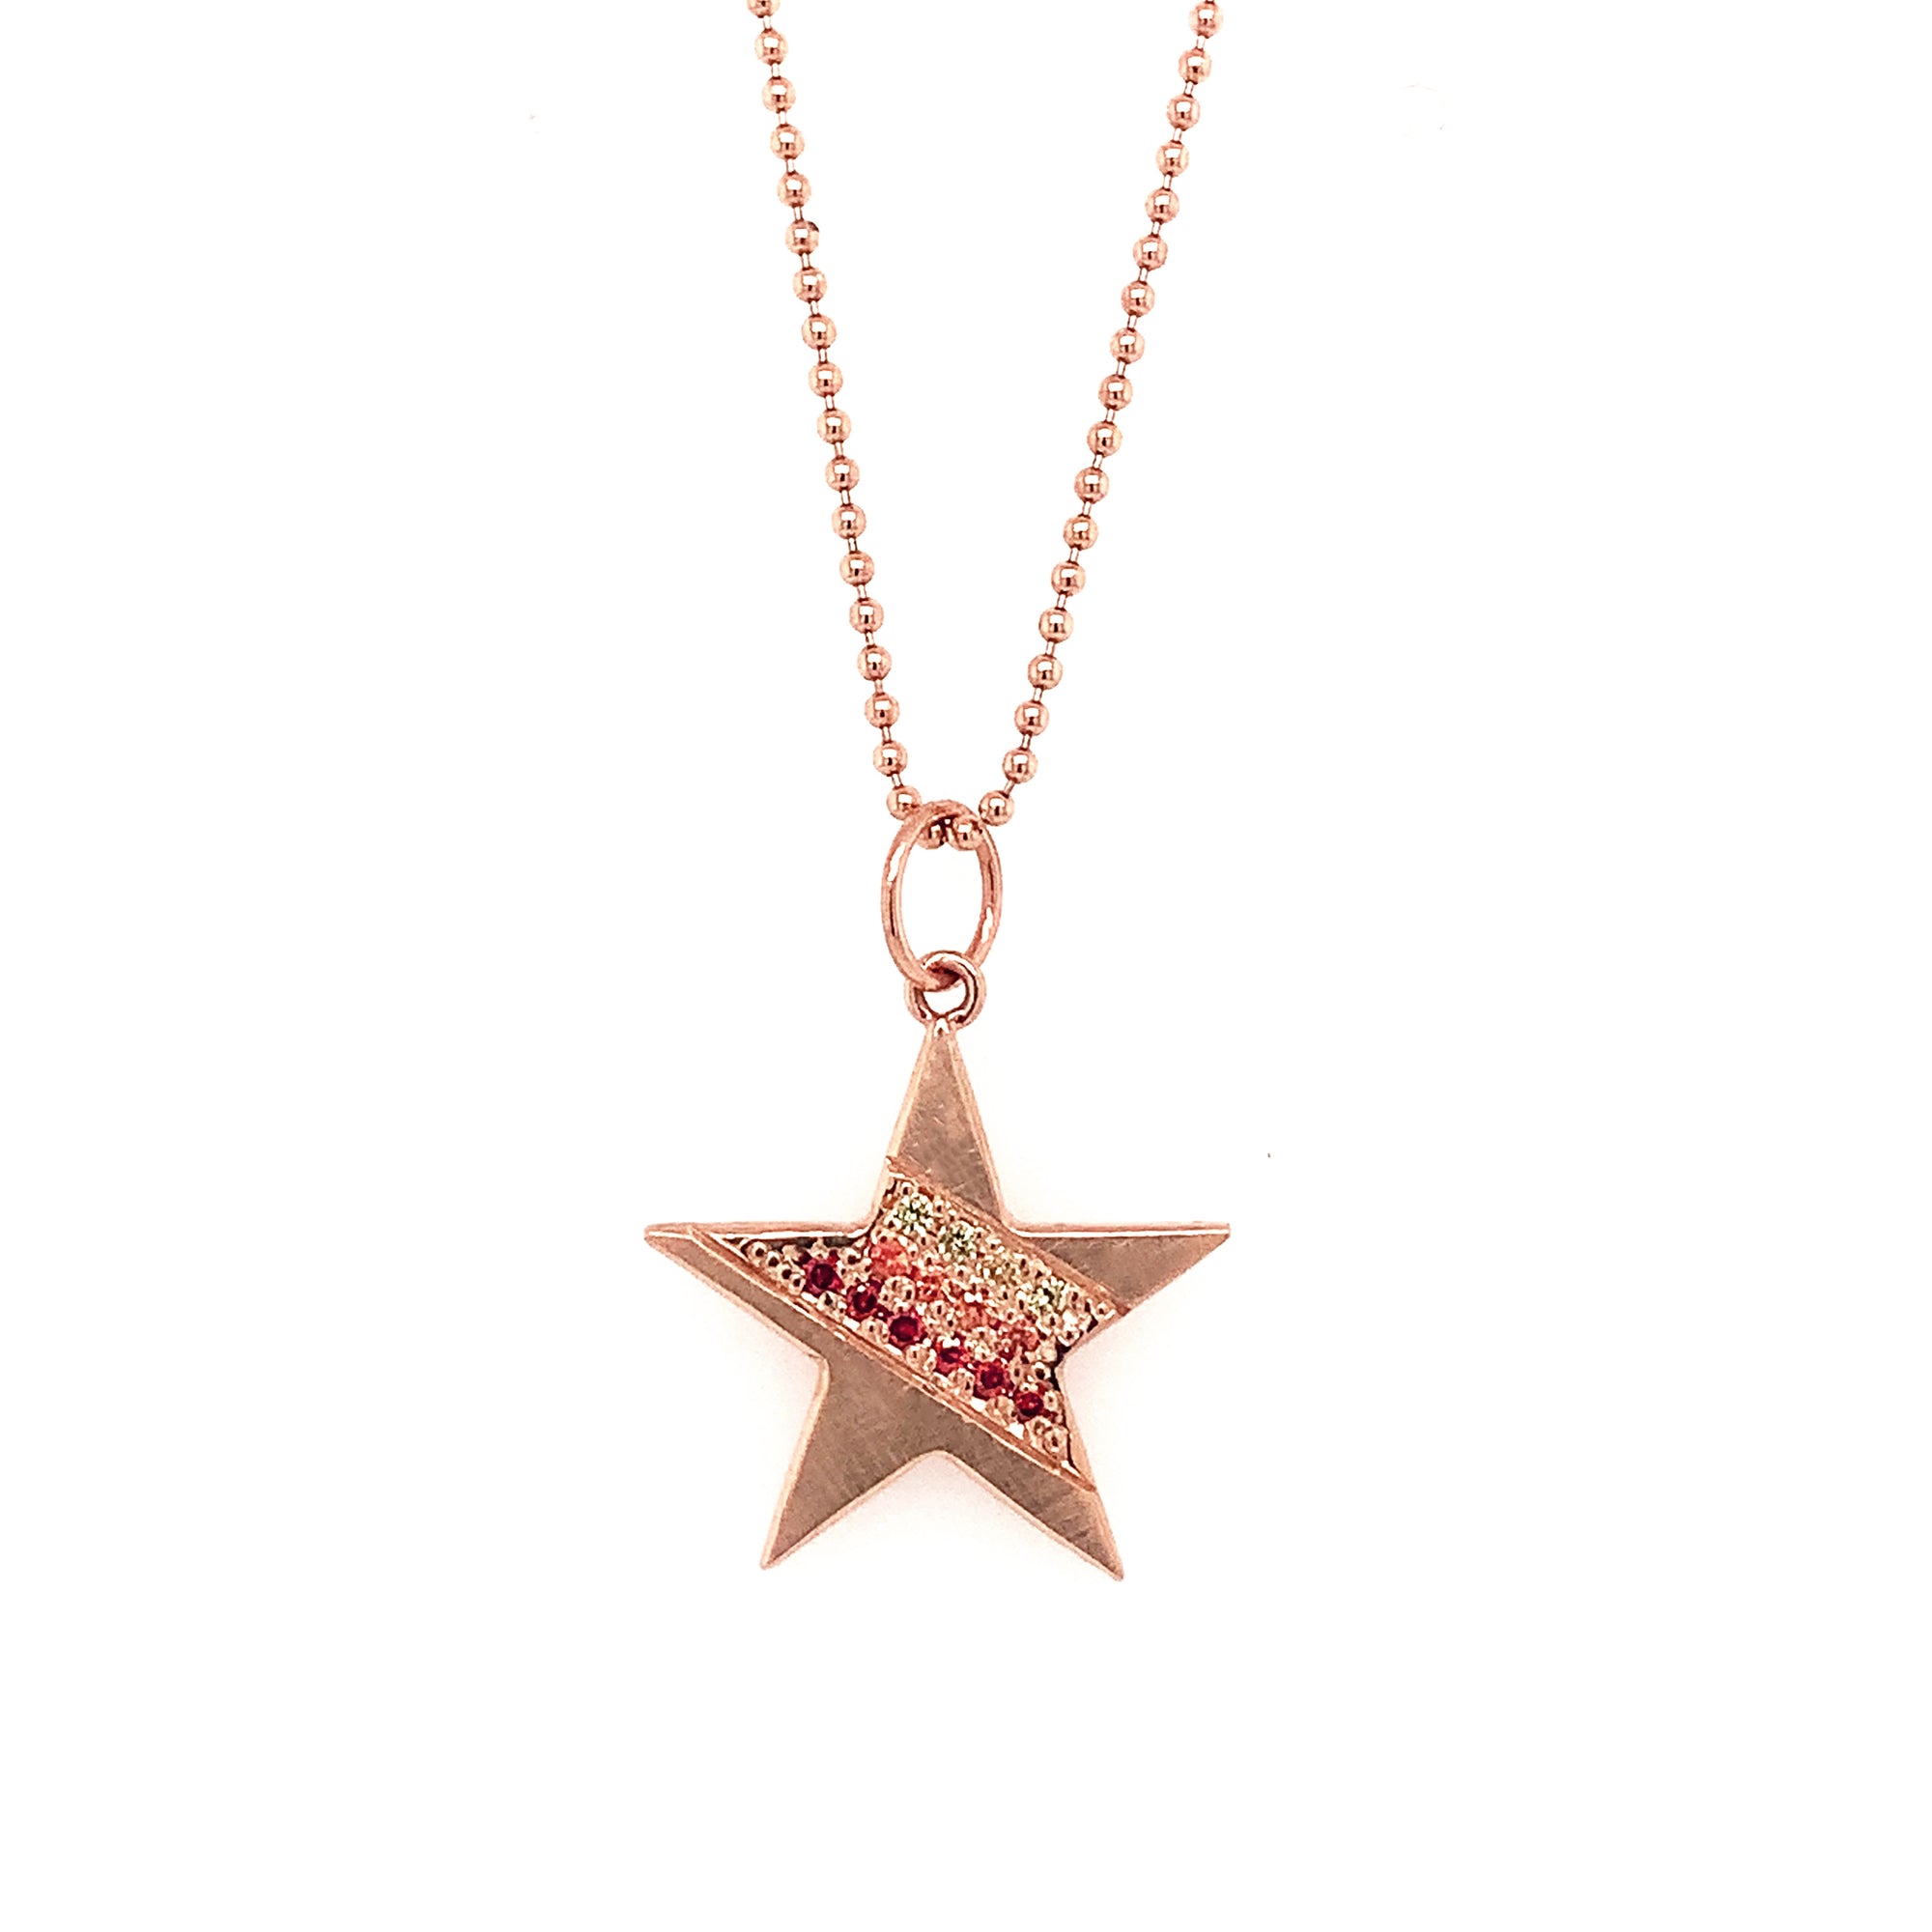 14k rose gold HAWK star charm with sapphires